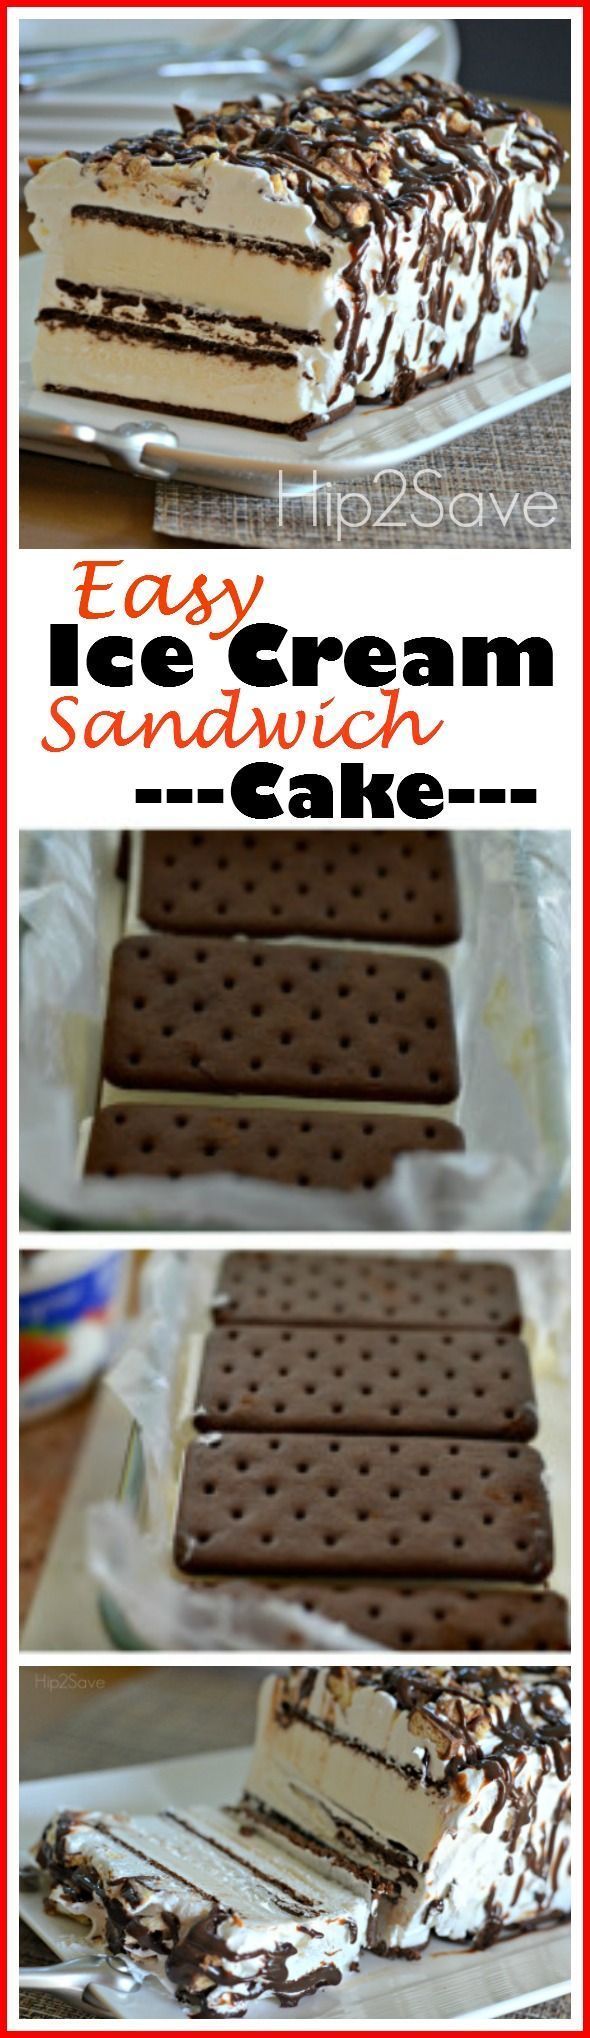 Enjoy this wonderful and super easy ice cream sandwich recipe during those summer days. Easy to make, and delicious melt in your